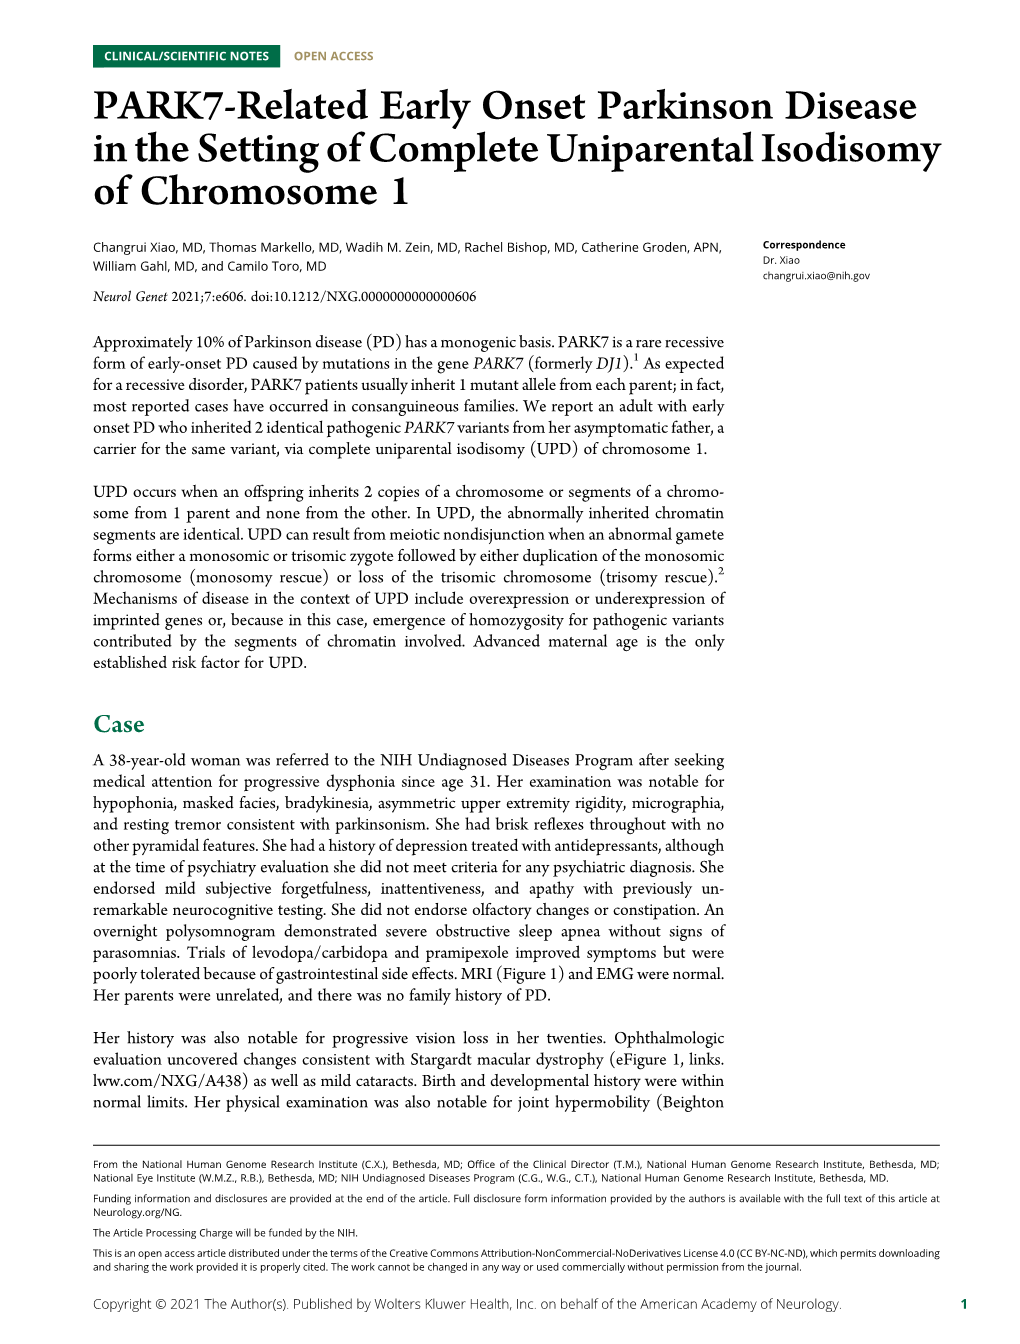 PARK7-Related Early Onset Parkinson Disease in the Setting of Complete Uniparental Isodisomy of Chromosome 1